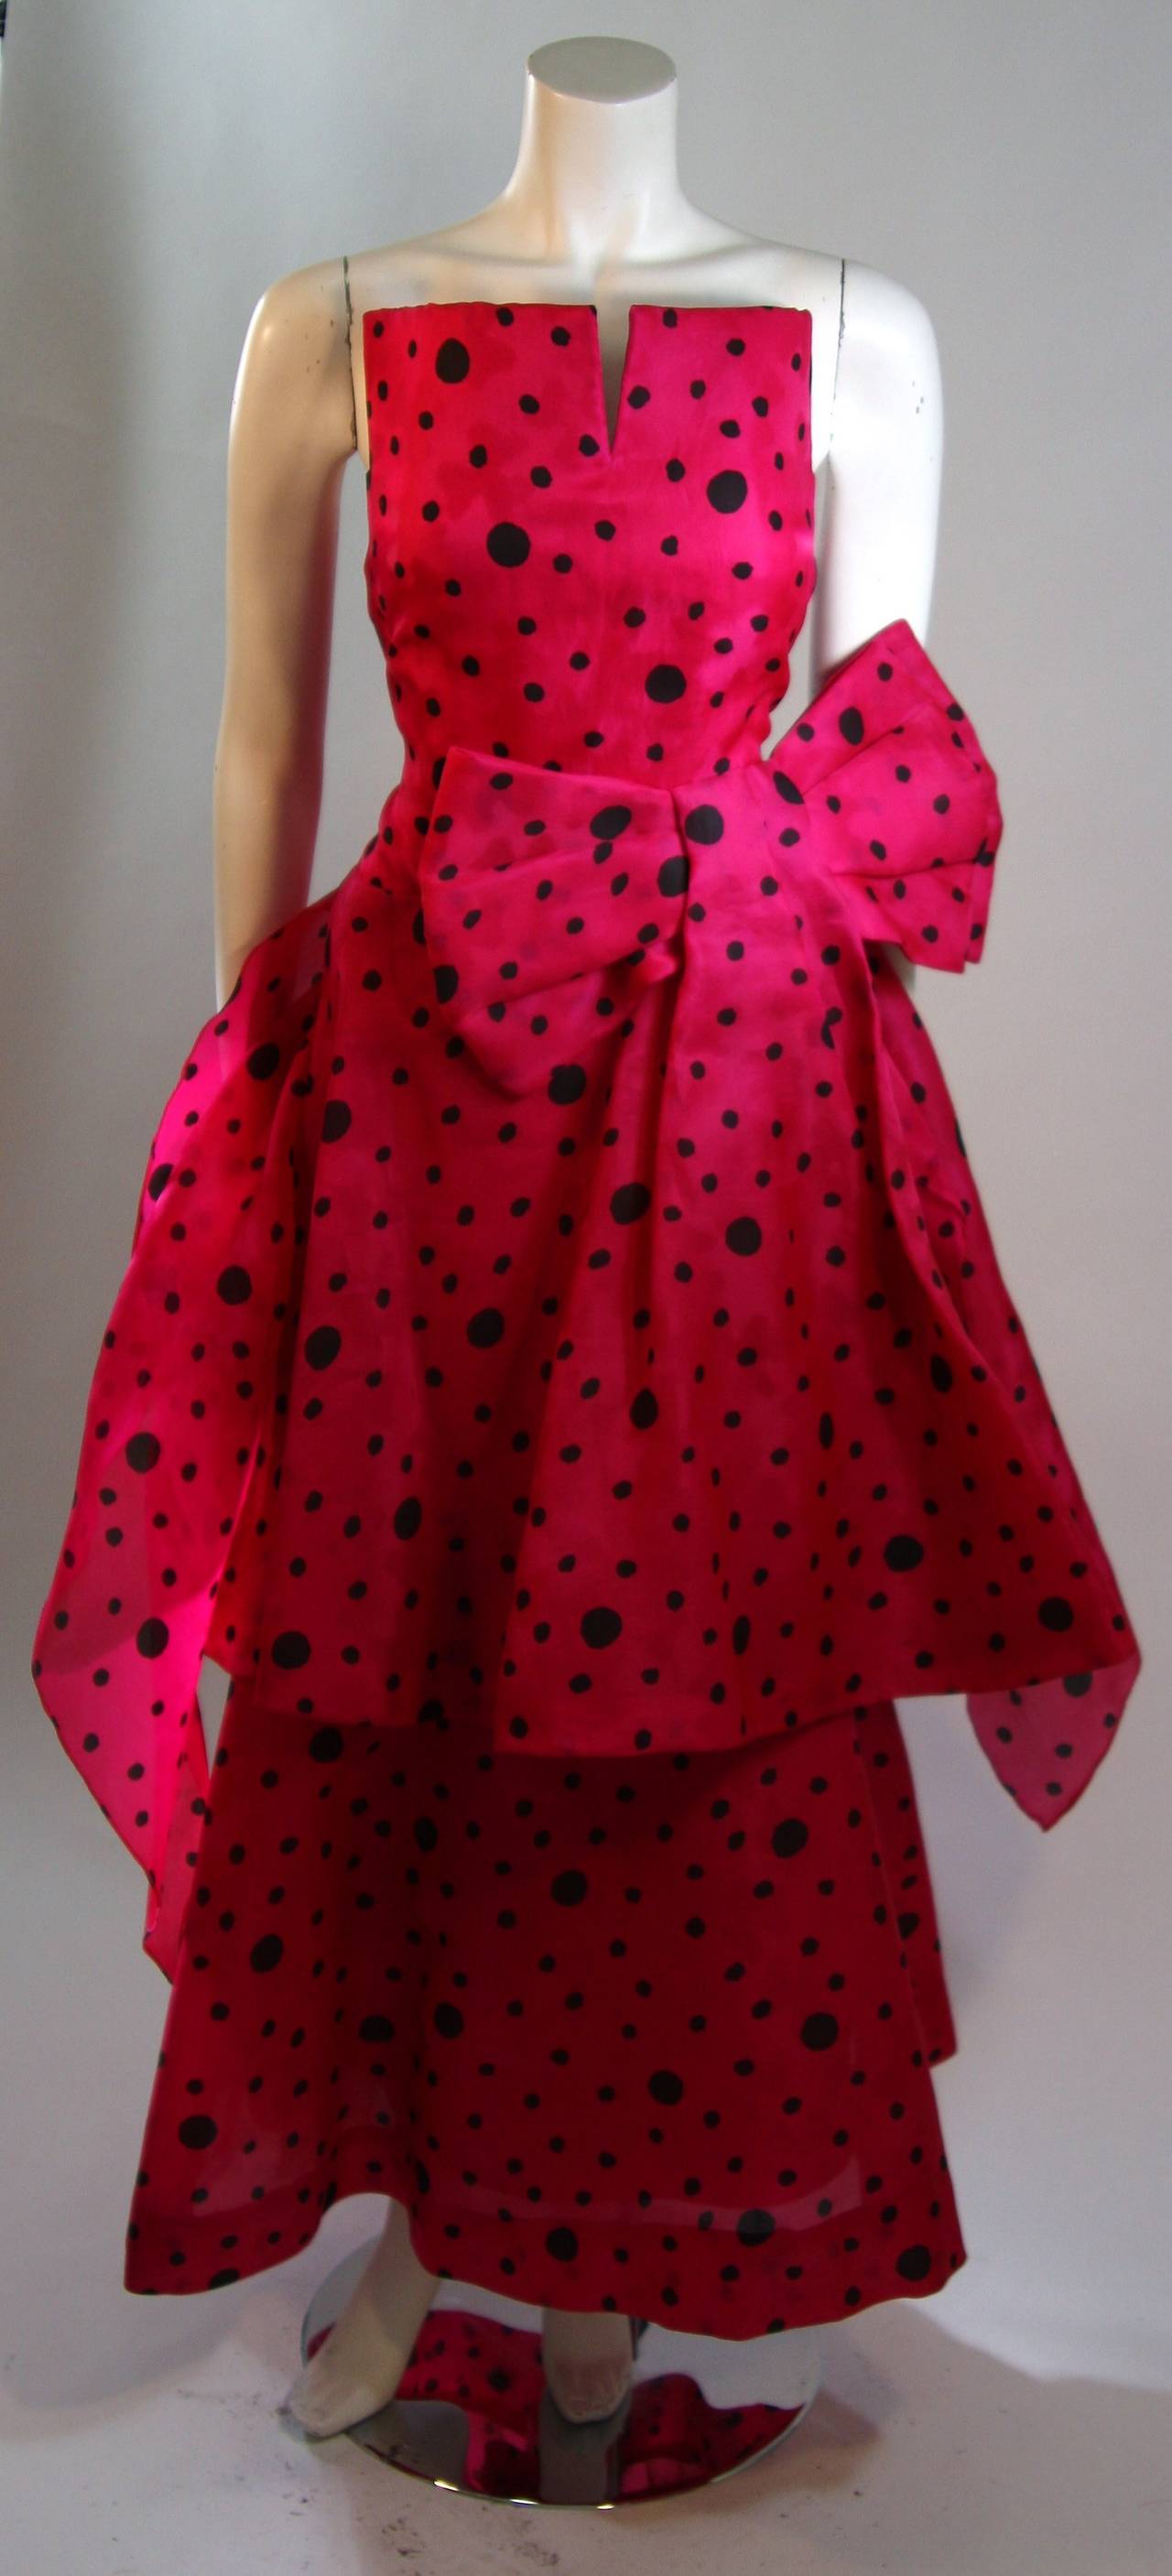 This is an Arnold Scaasi design. This wonderful gown is composed of a striking pink fabric with a black polka dot print. The gown features a structured neckline and an exaggerated bow plus layers fabric for a gorgeous silhouette. Comes with a shawl.